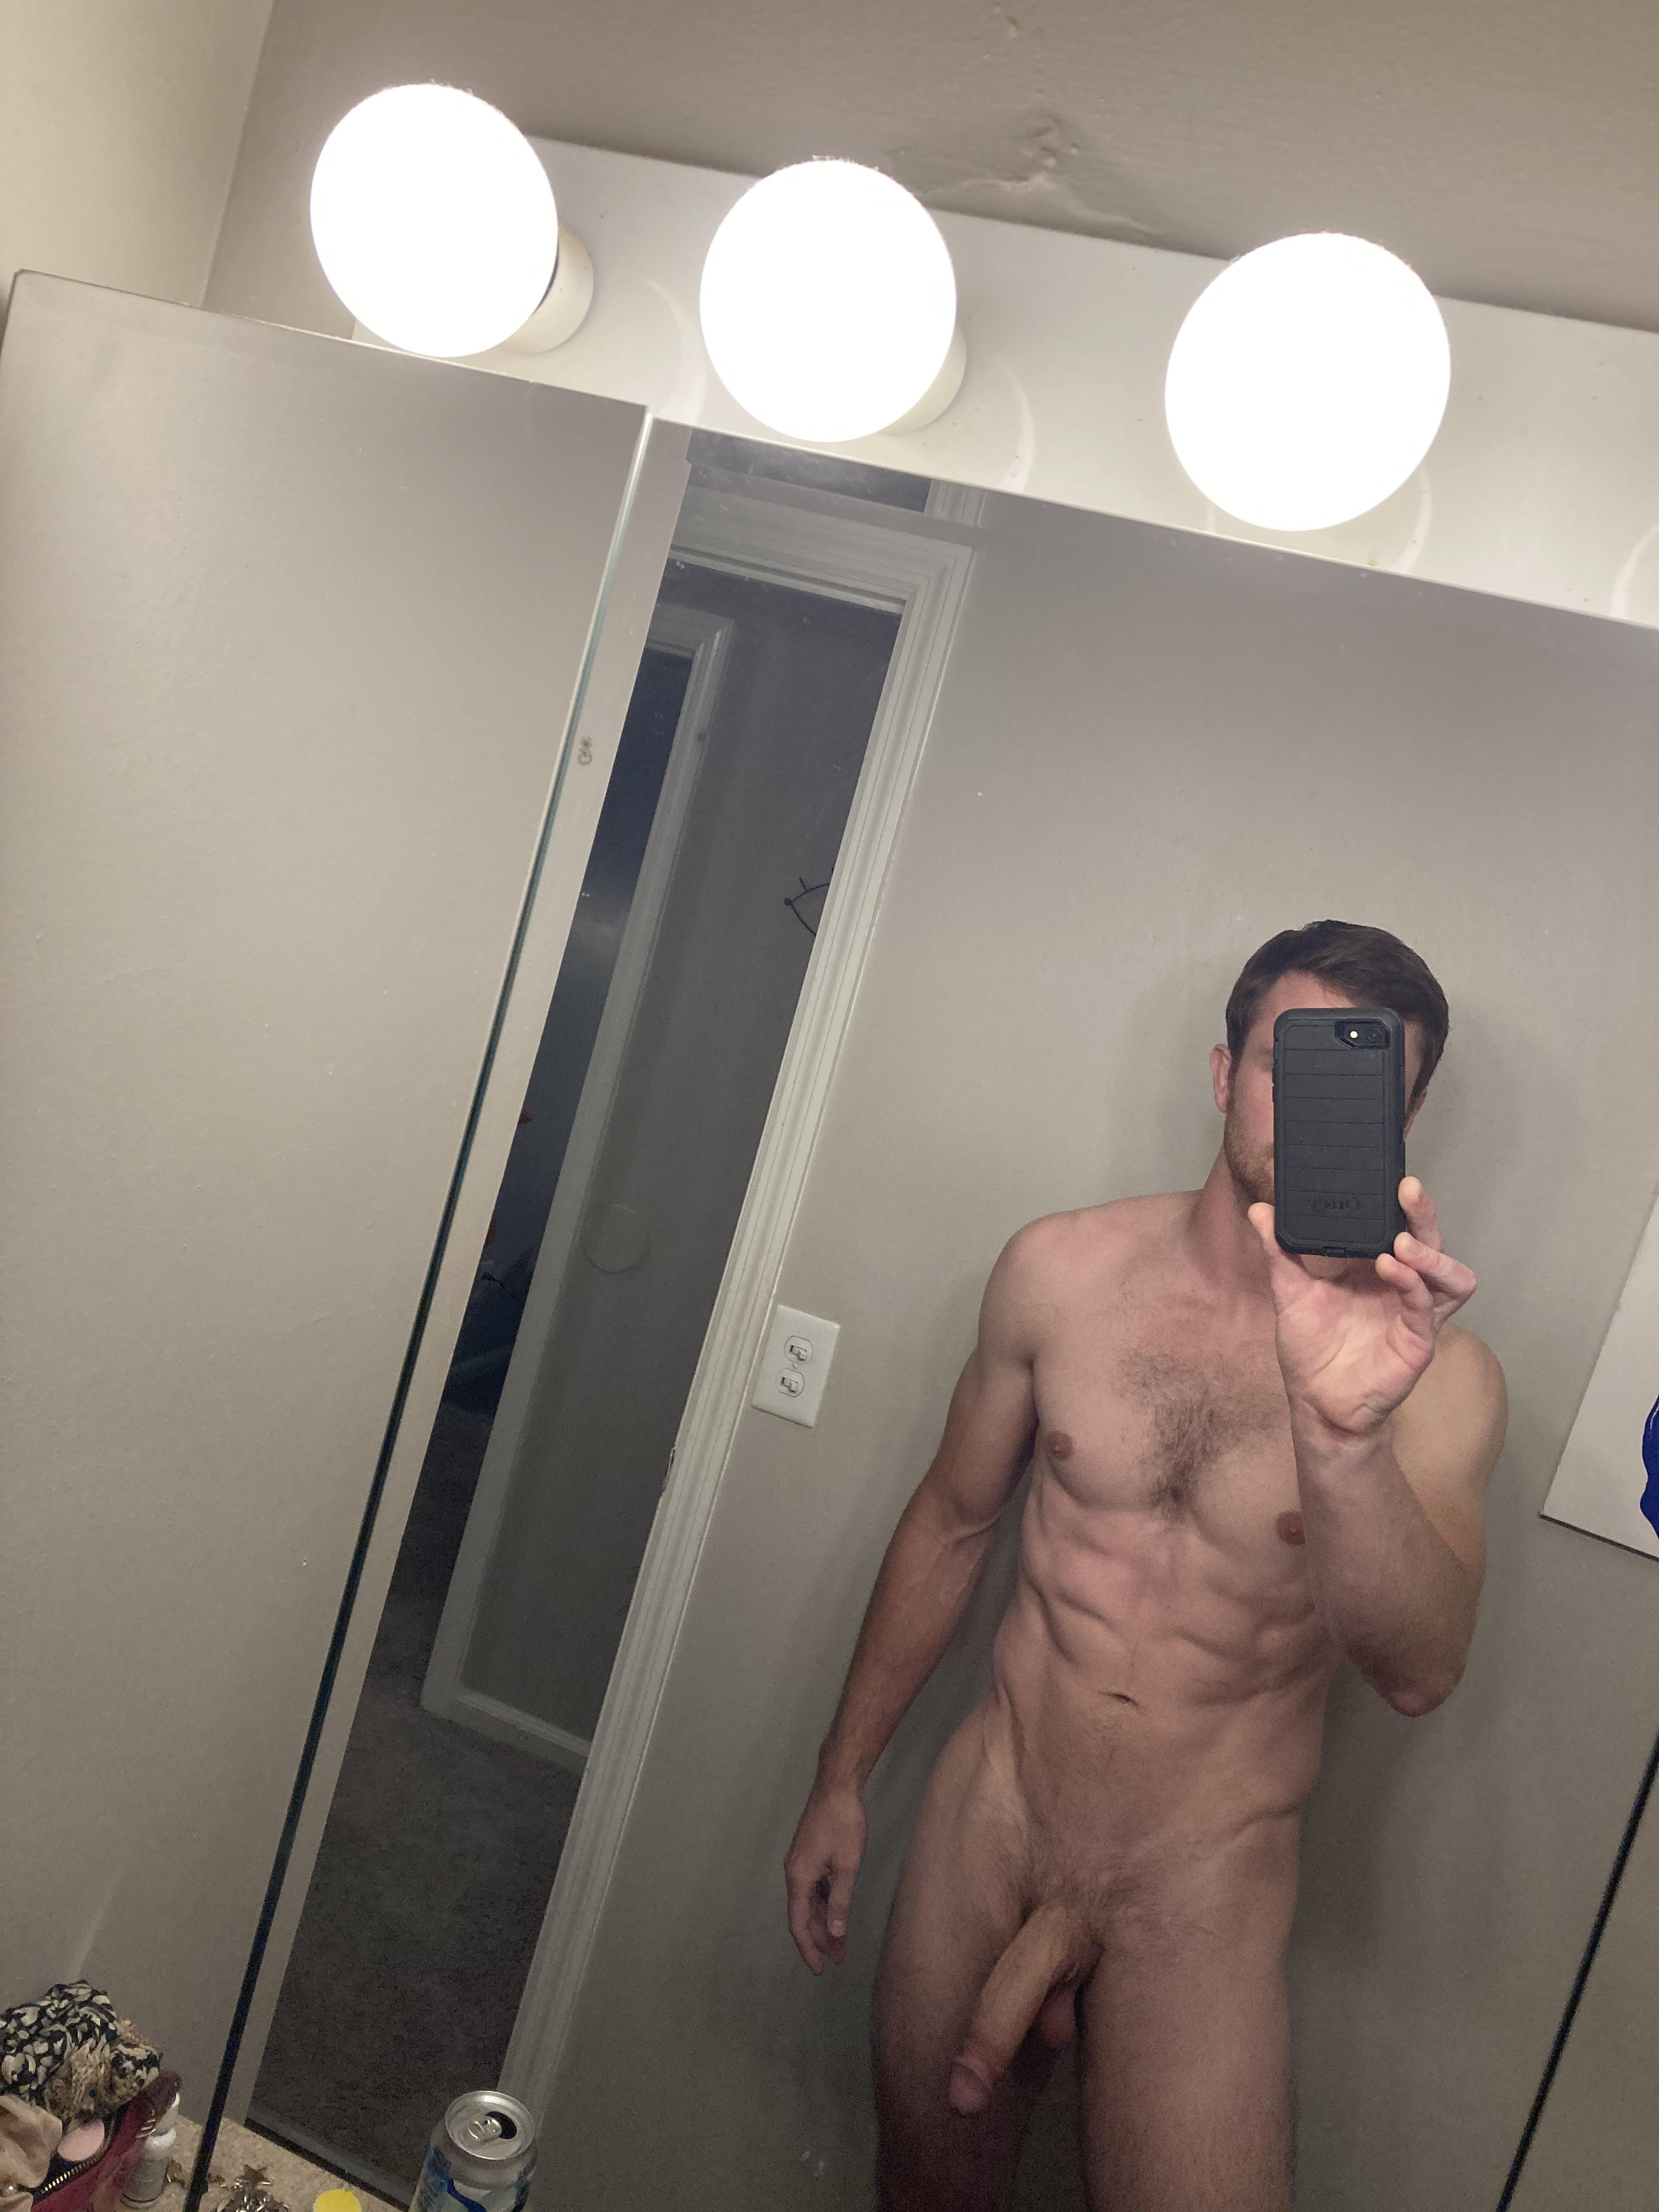 straight muscle guys naked selfies sexy photo